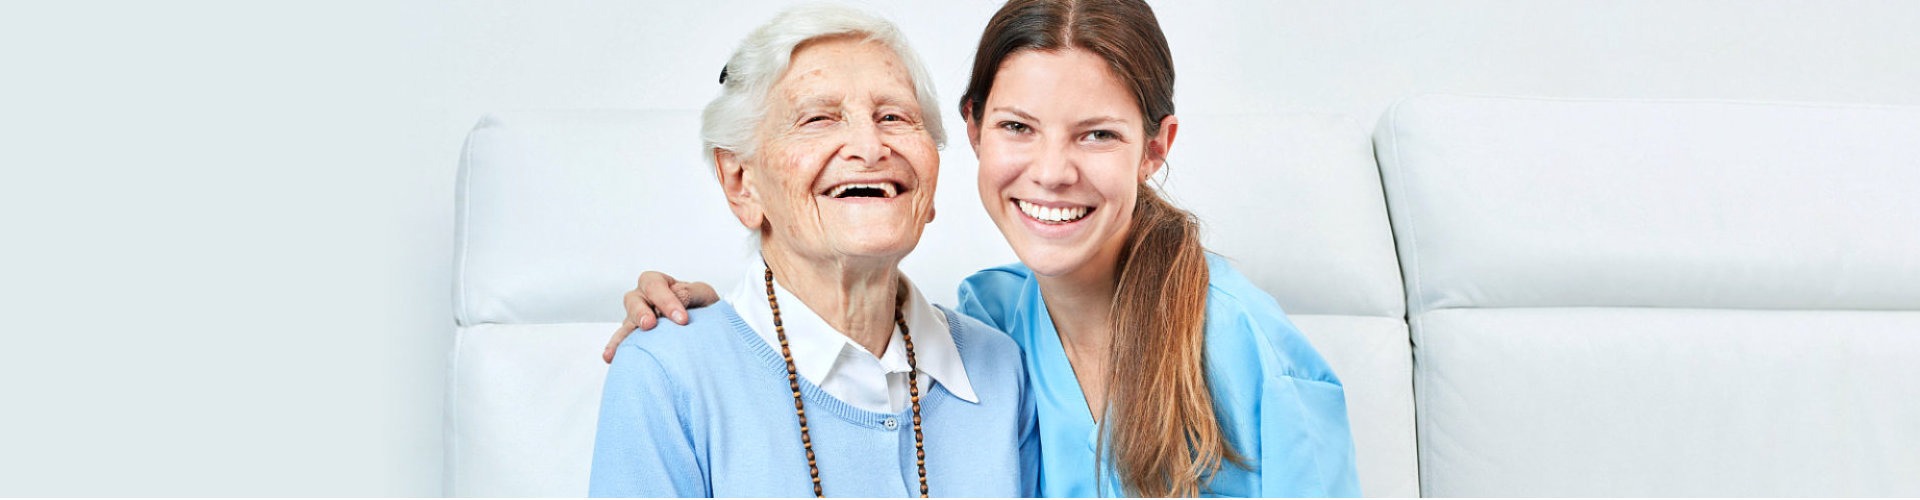 caregiver and old lady smiling